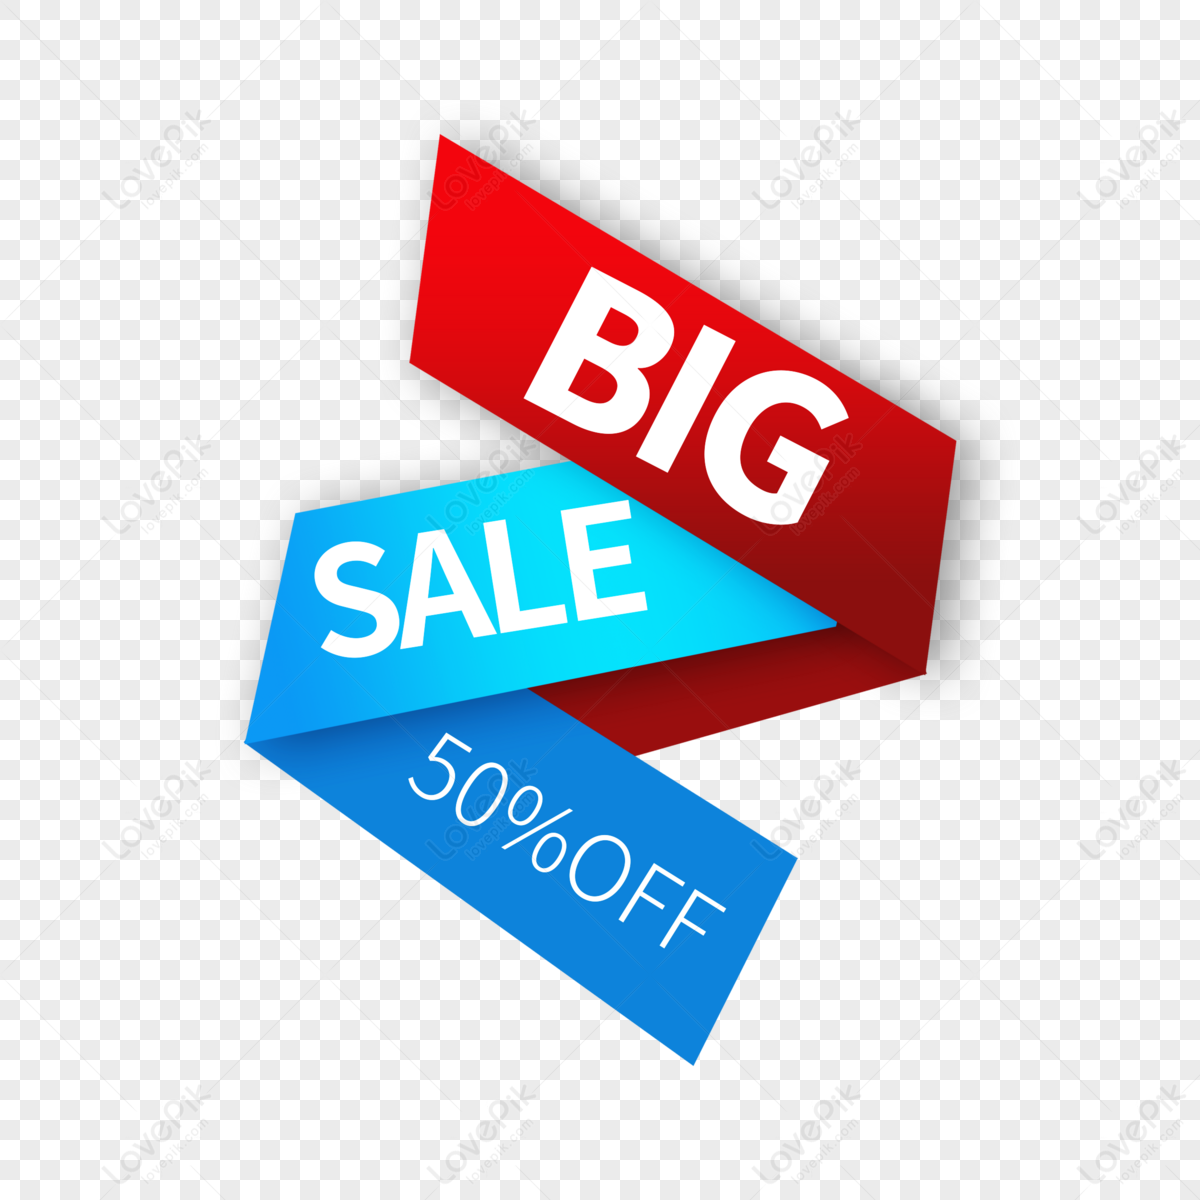 Banner Special Promotion Logo Design Isolated Vector Illustration Royalty  Free SVG, Cliparts, Vectors, and Stock Illustration. Image 100025812.